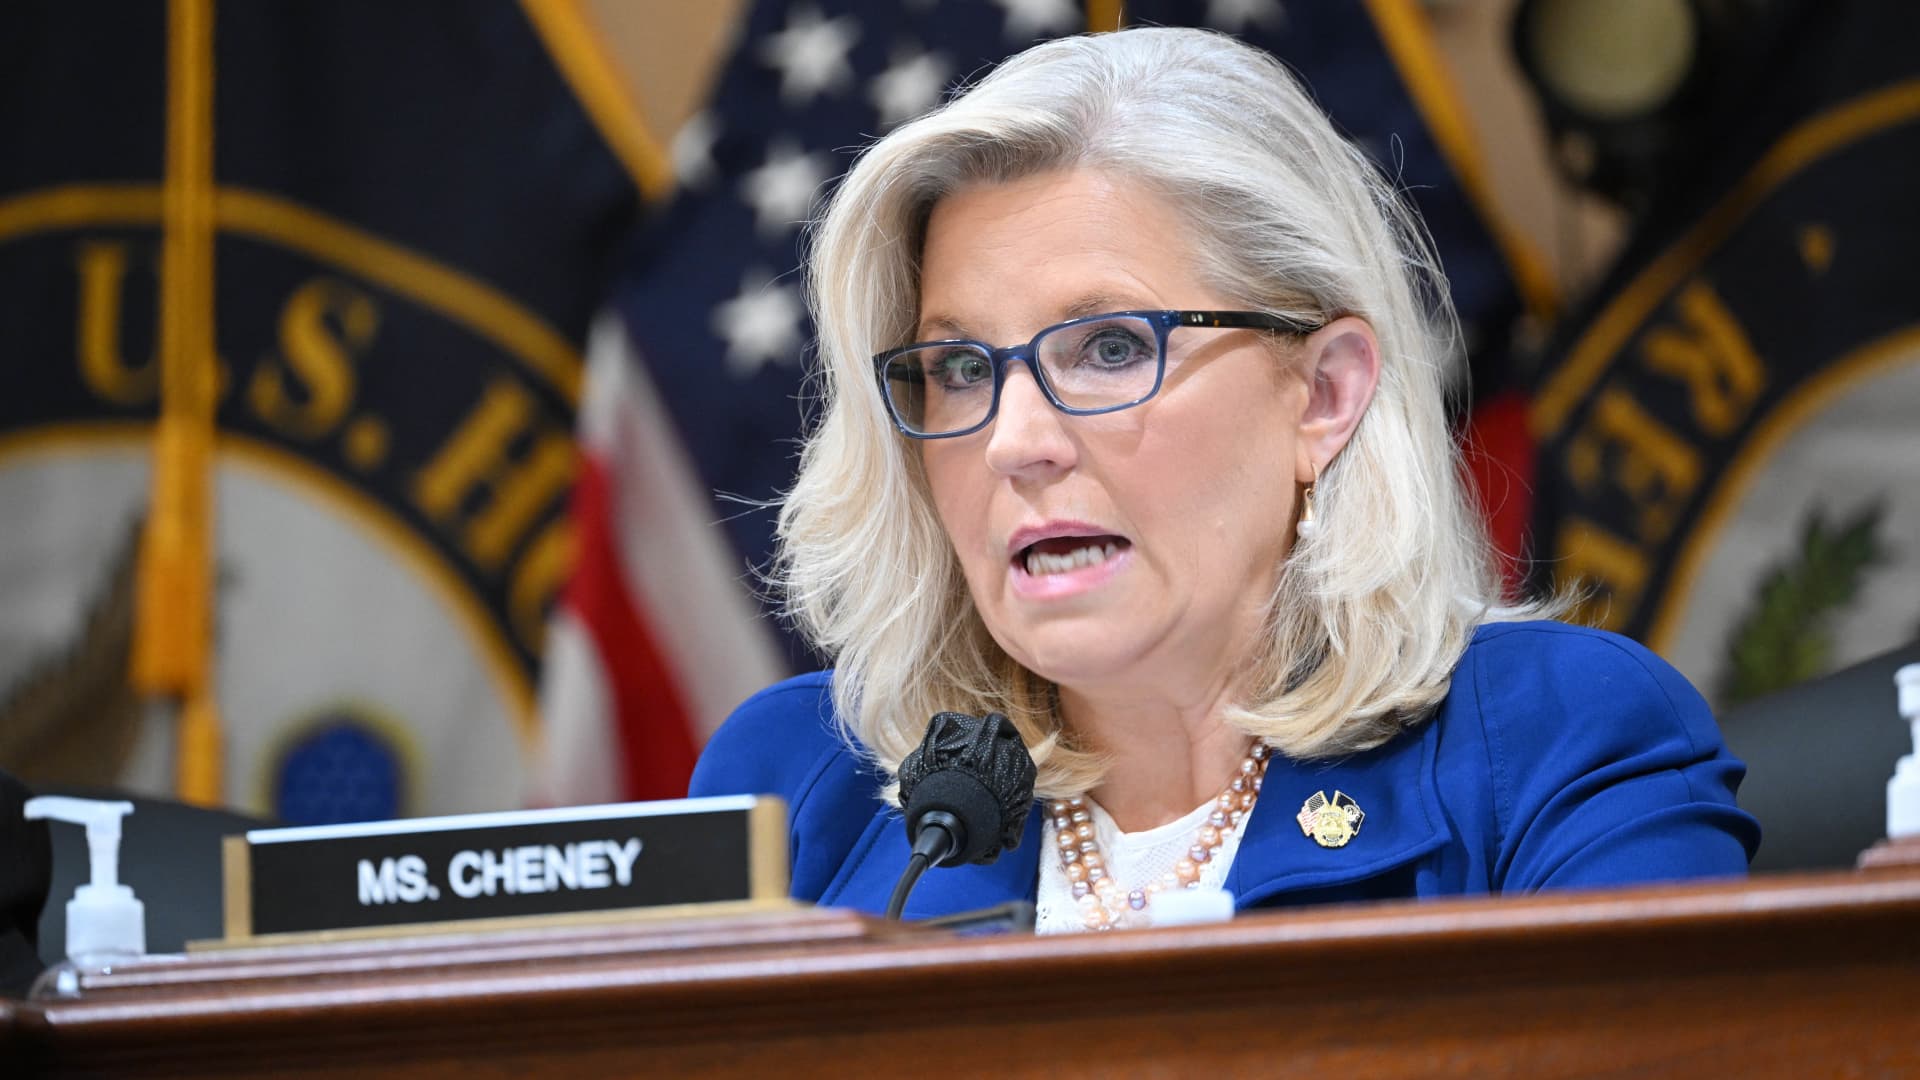 Committee Vice Chair Liz Cheney speaks at a US House Select Committee hearing to Investigate the January 6 Attack on the US Capitol, on Capitol Hill in Washington, DC, on October 13, 2022.